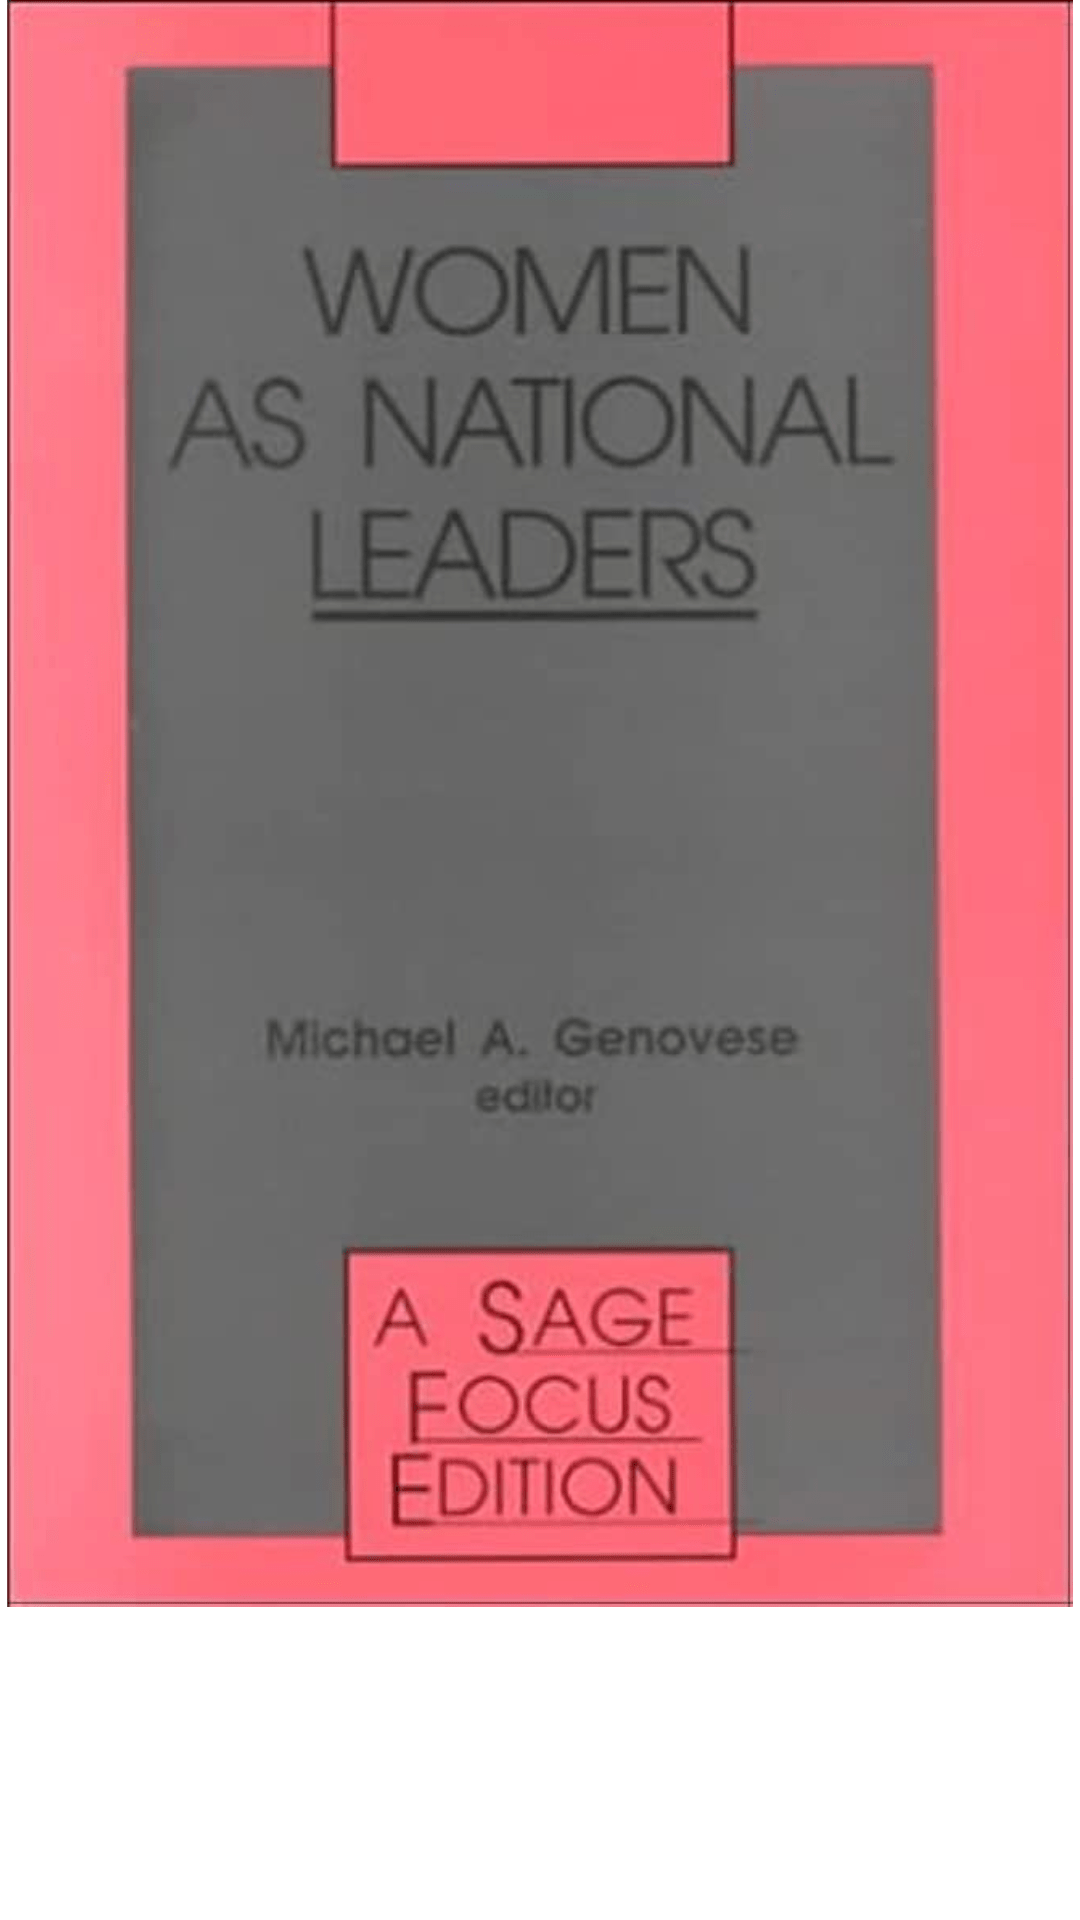 Women as National Leaders by Michael A. Genovese